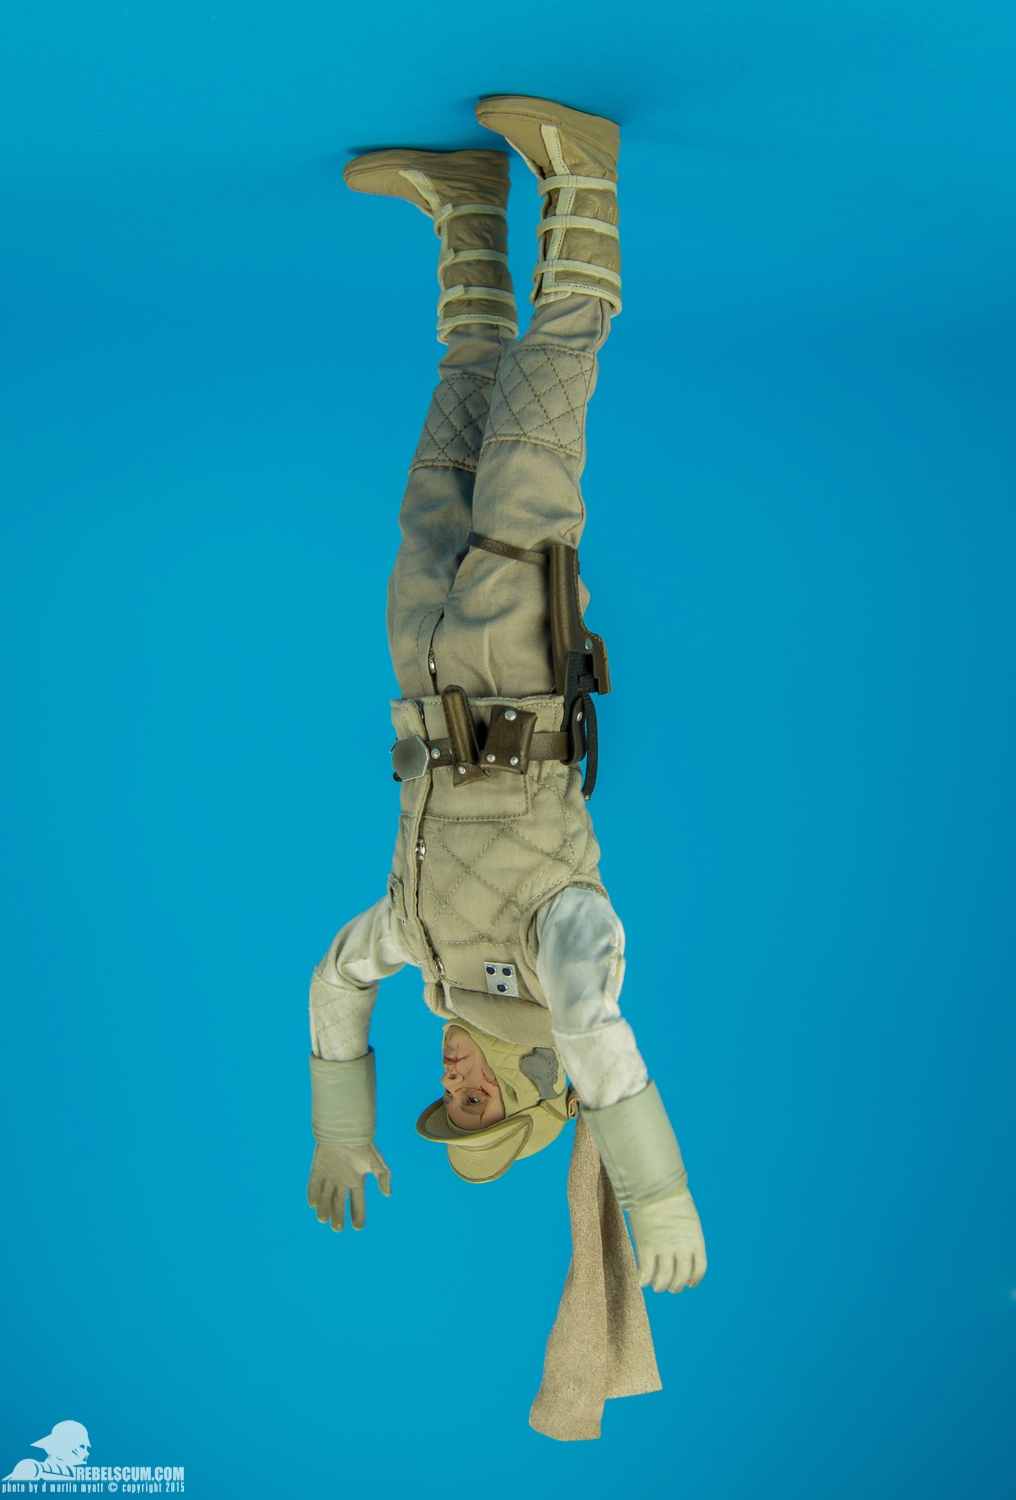 Luke-Skywalker-Hoth-Sixth-Scale-Sideshow-Collectibles-Star-Wars-011.jpg